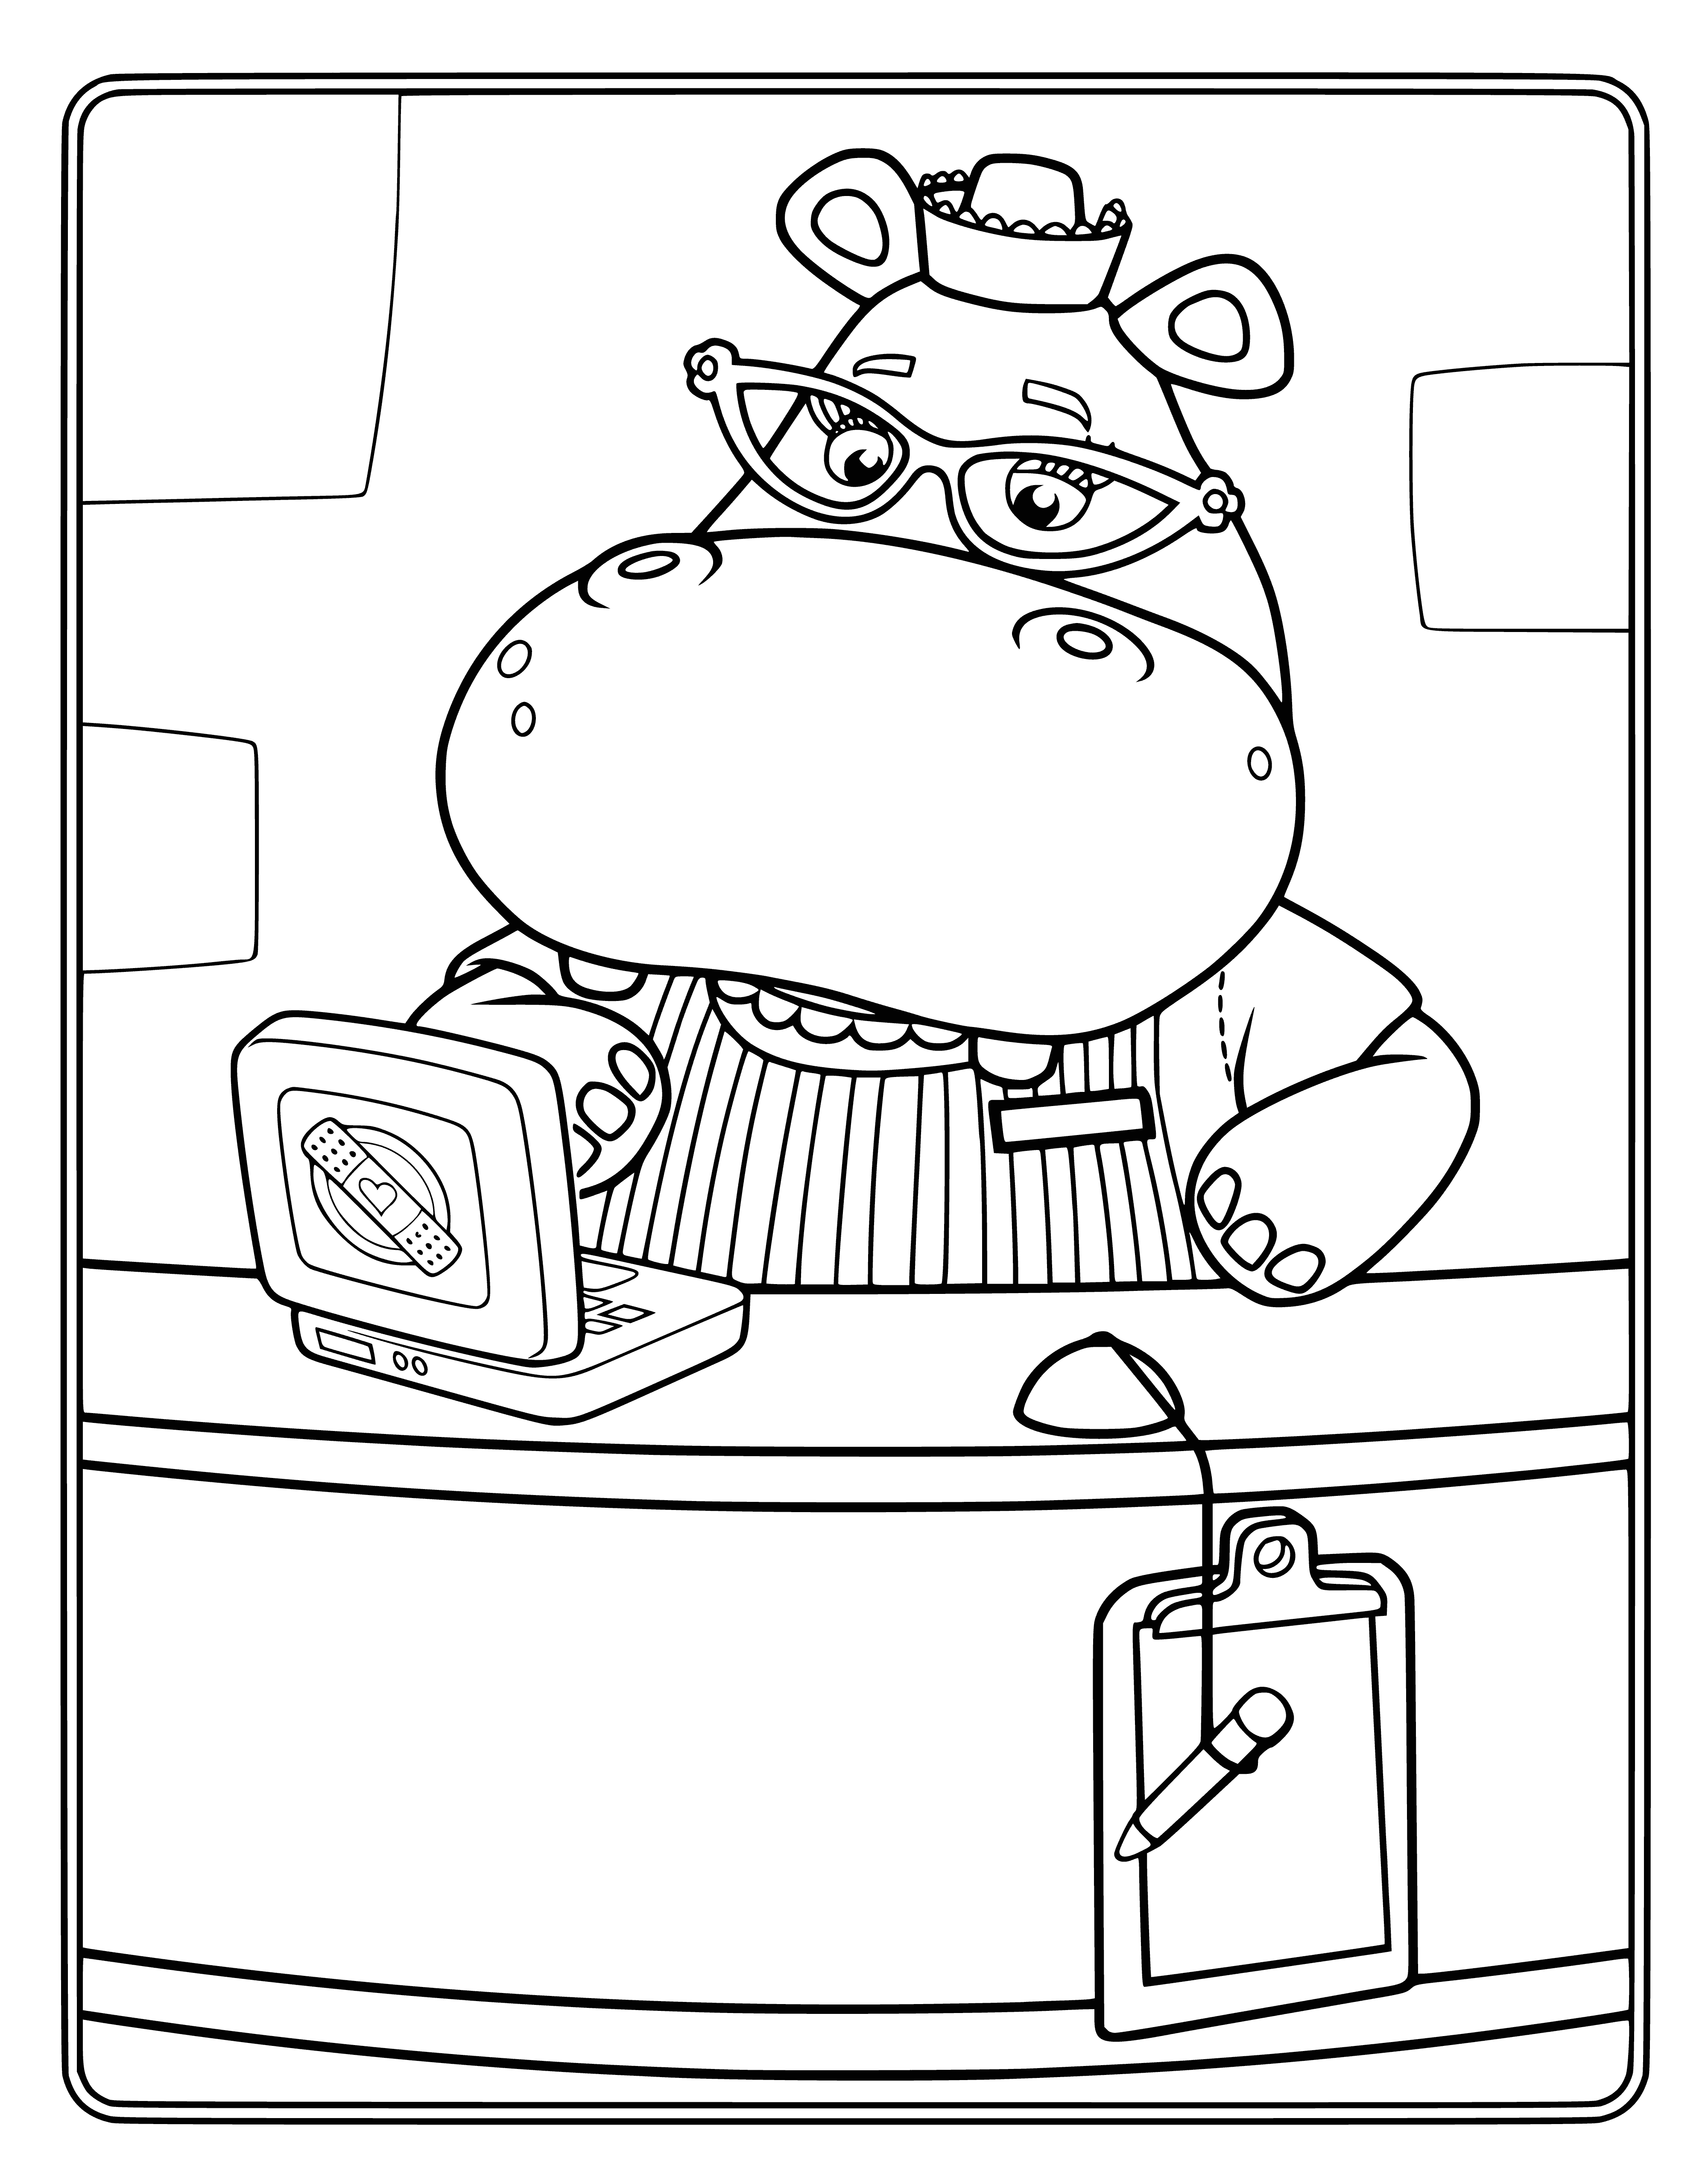 coloring page: HippoHallie is a musical, helpful hippo who always spreads joy! #HippoHallie